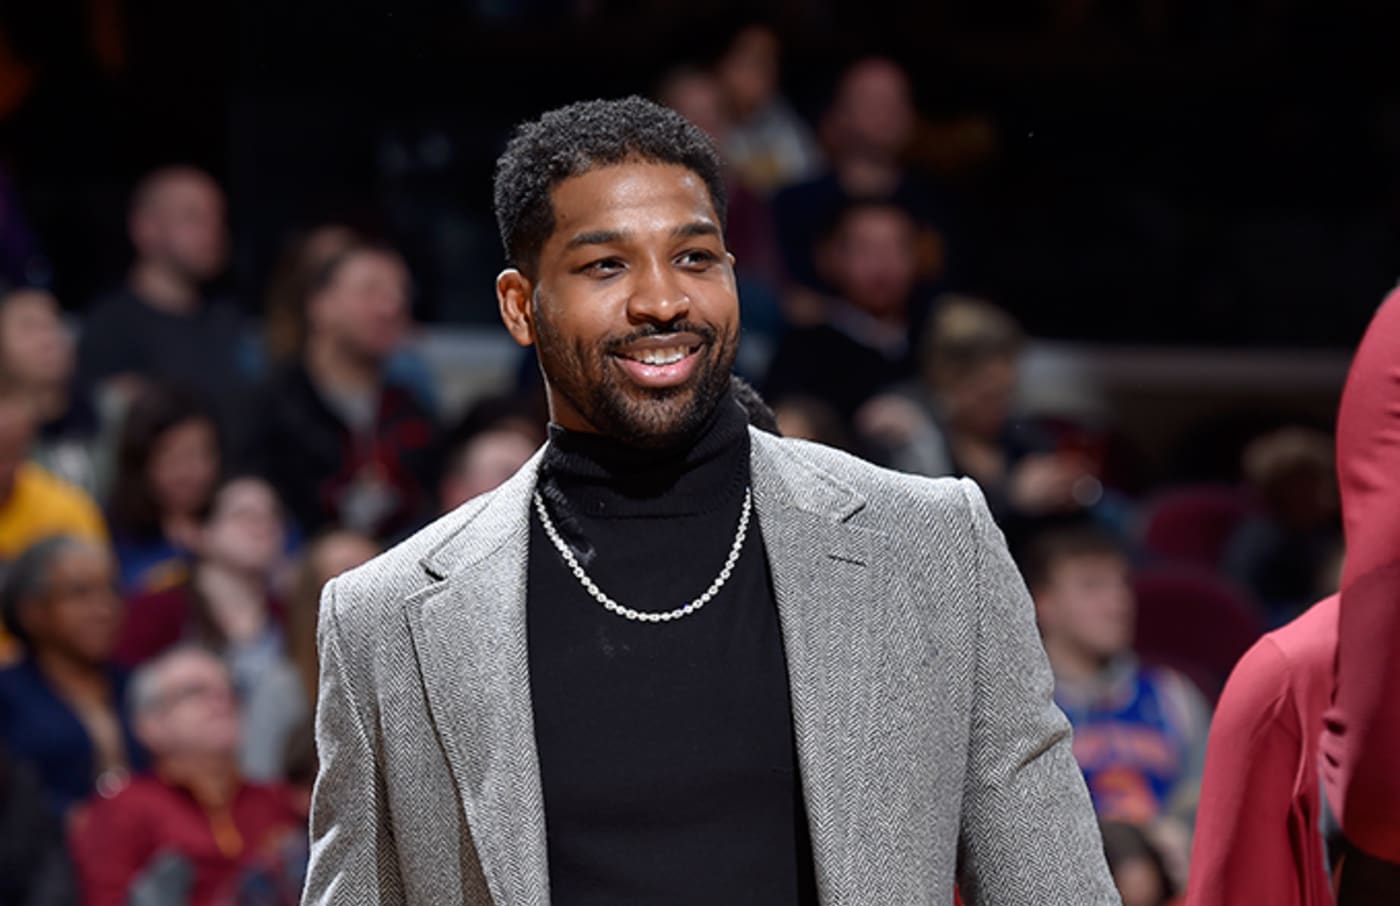 Khloe Kardashian's Estranged Partner Tristan Thompson Reportedly Expecting Third Child With Personal Trainer